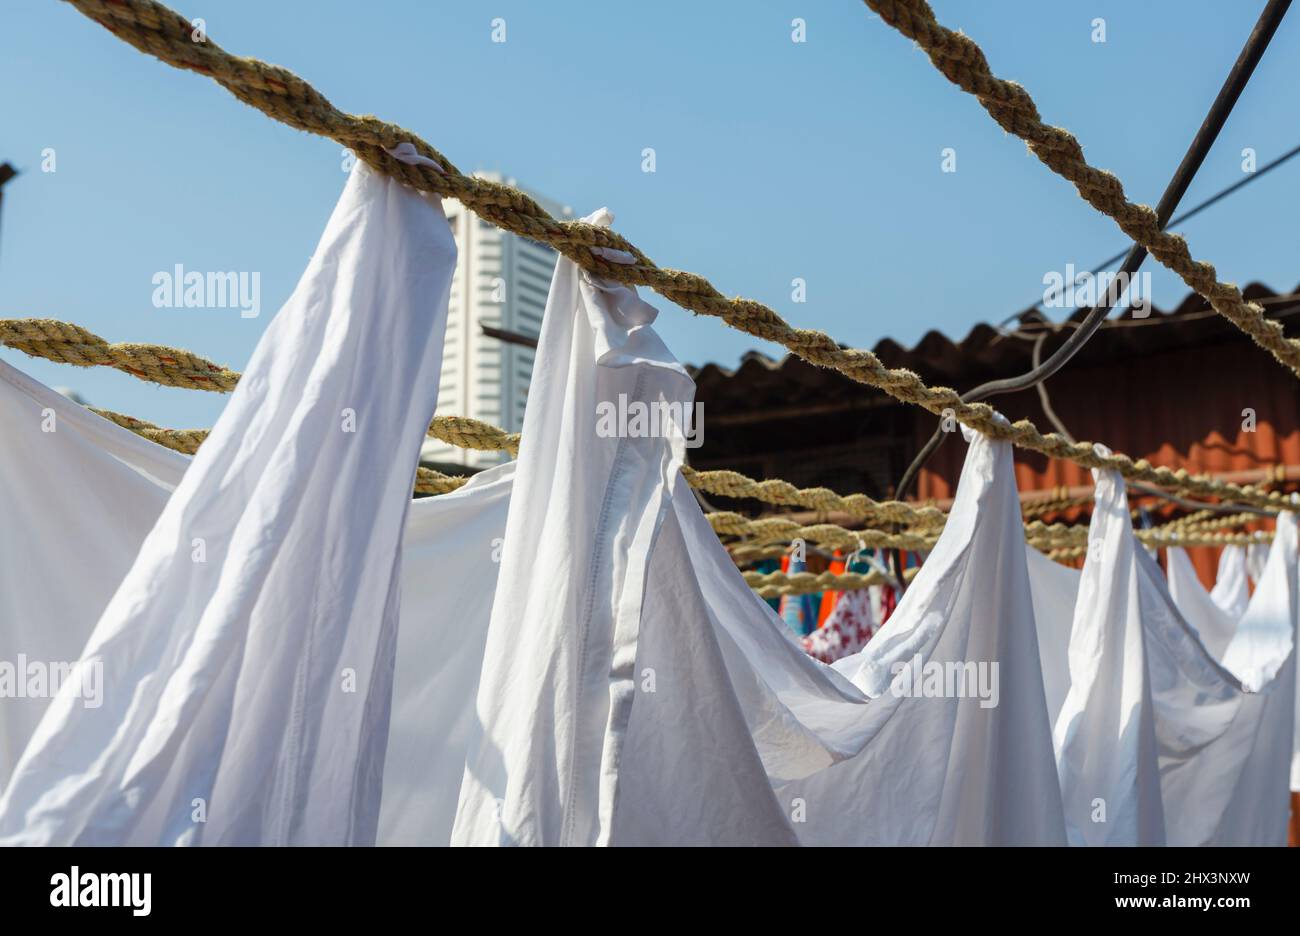 Clean newly washed white sheets hung out to dry, drying on washing line ropes in Mahalaxmi Dhobi Ghat, a large open air laundromat in Mumbai, India Stock Photo